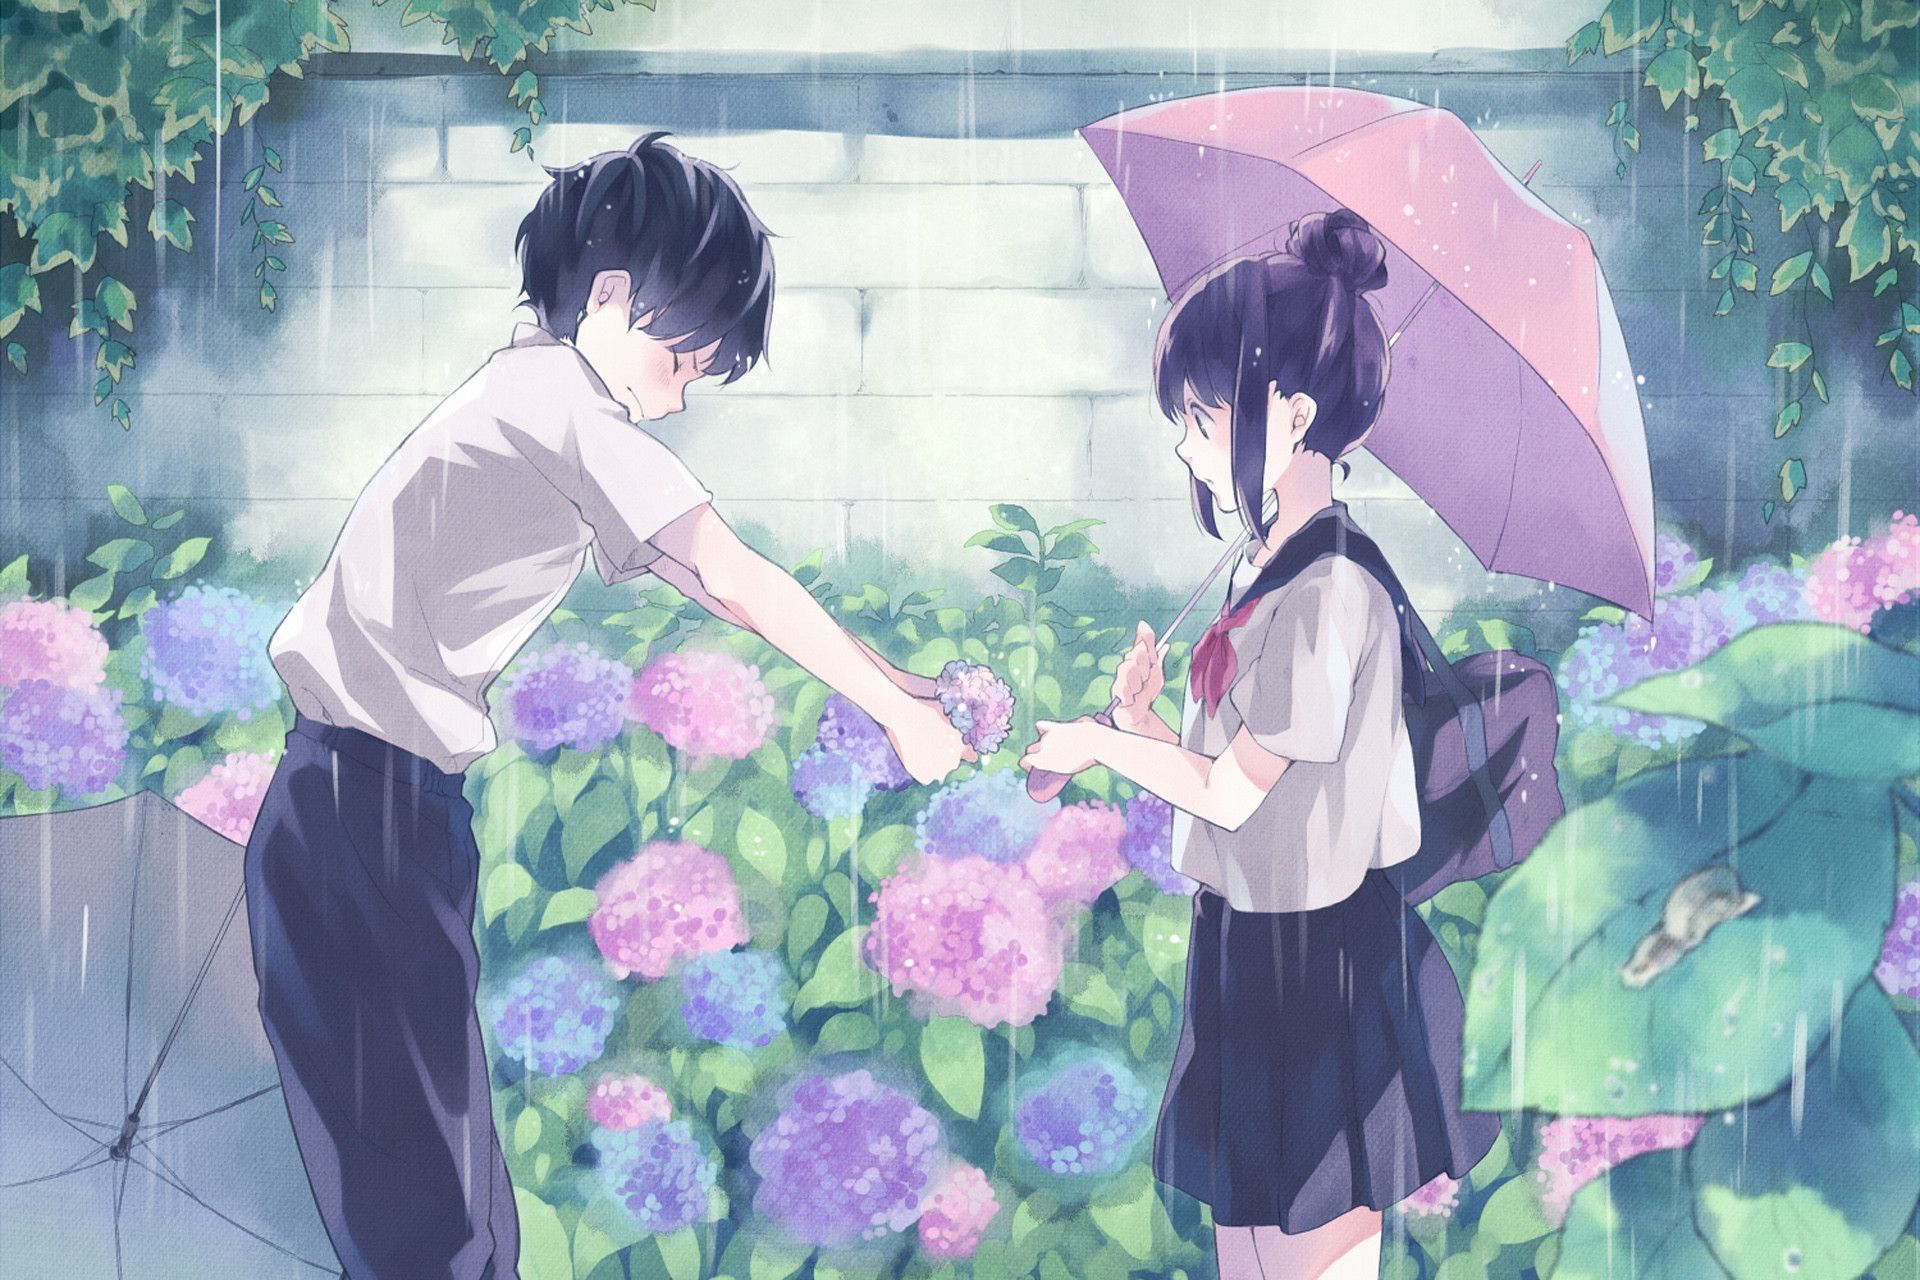 Boy And Girl Anime Love Hd Wallpapers Wallpaper Cave